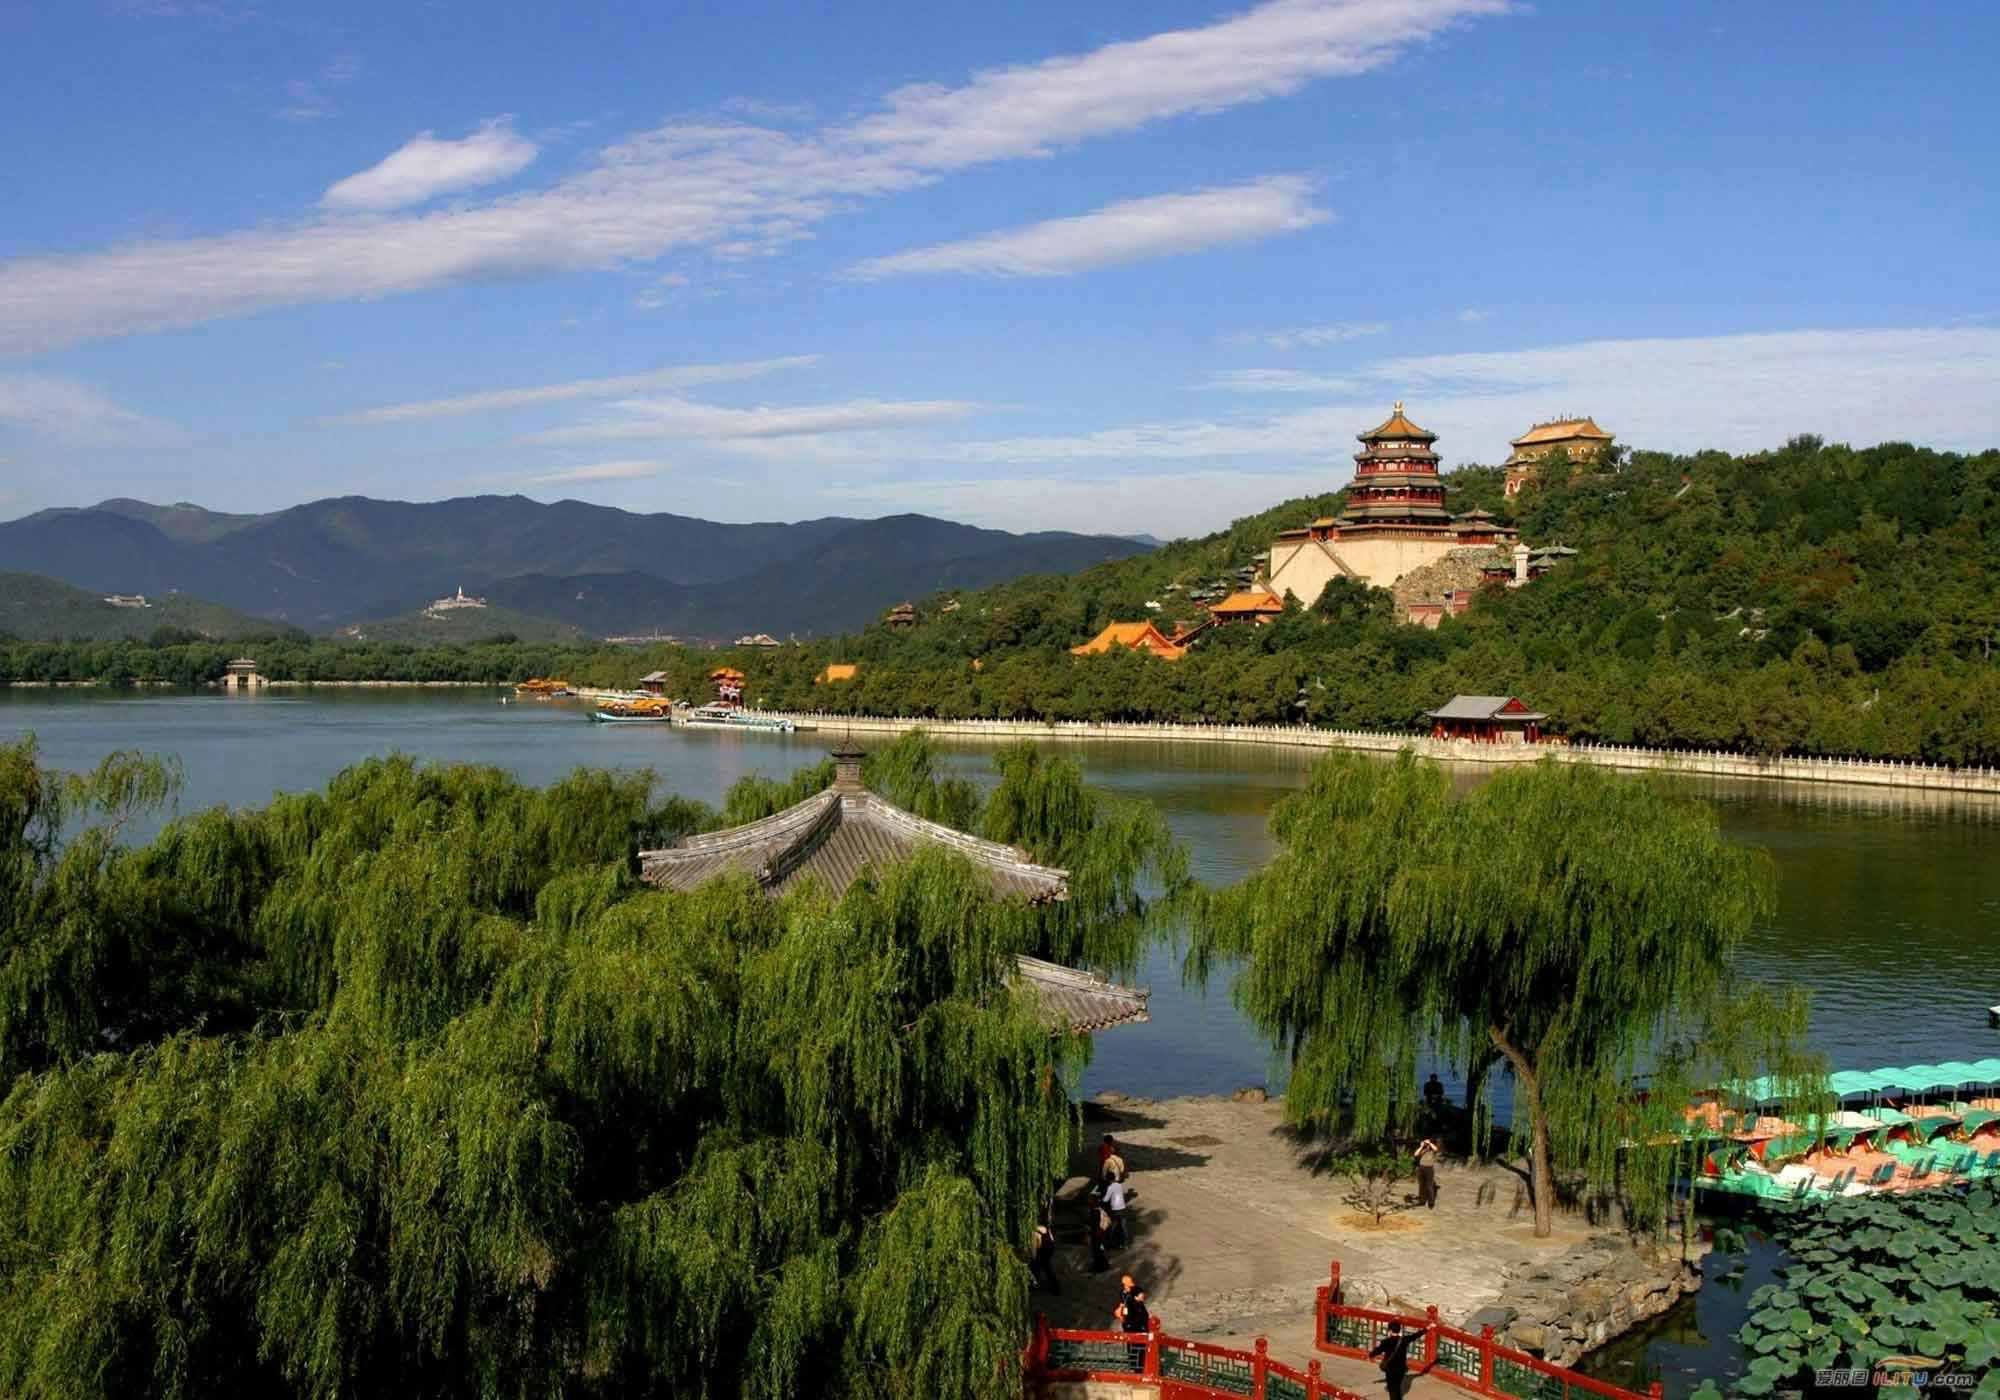 Beijing private tour of Badaling Great Wall and Summer Palace in Beijing